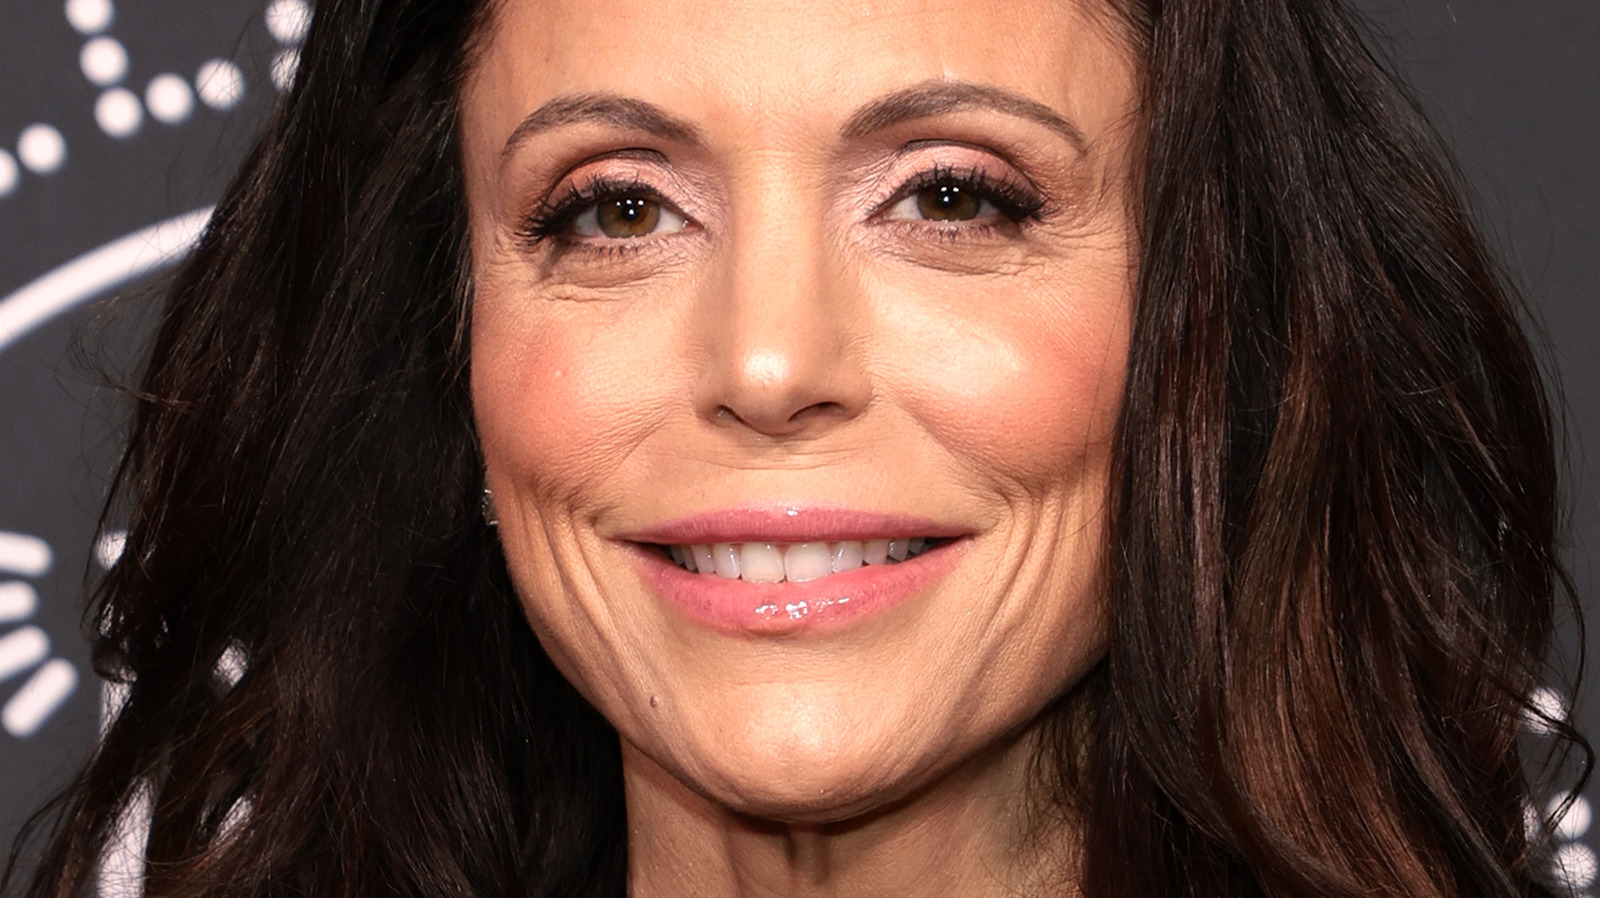 Bethenny Frankel Causes A Stir With Feisty Comments On Amber Heard